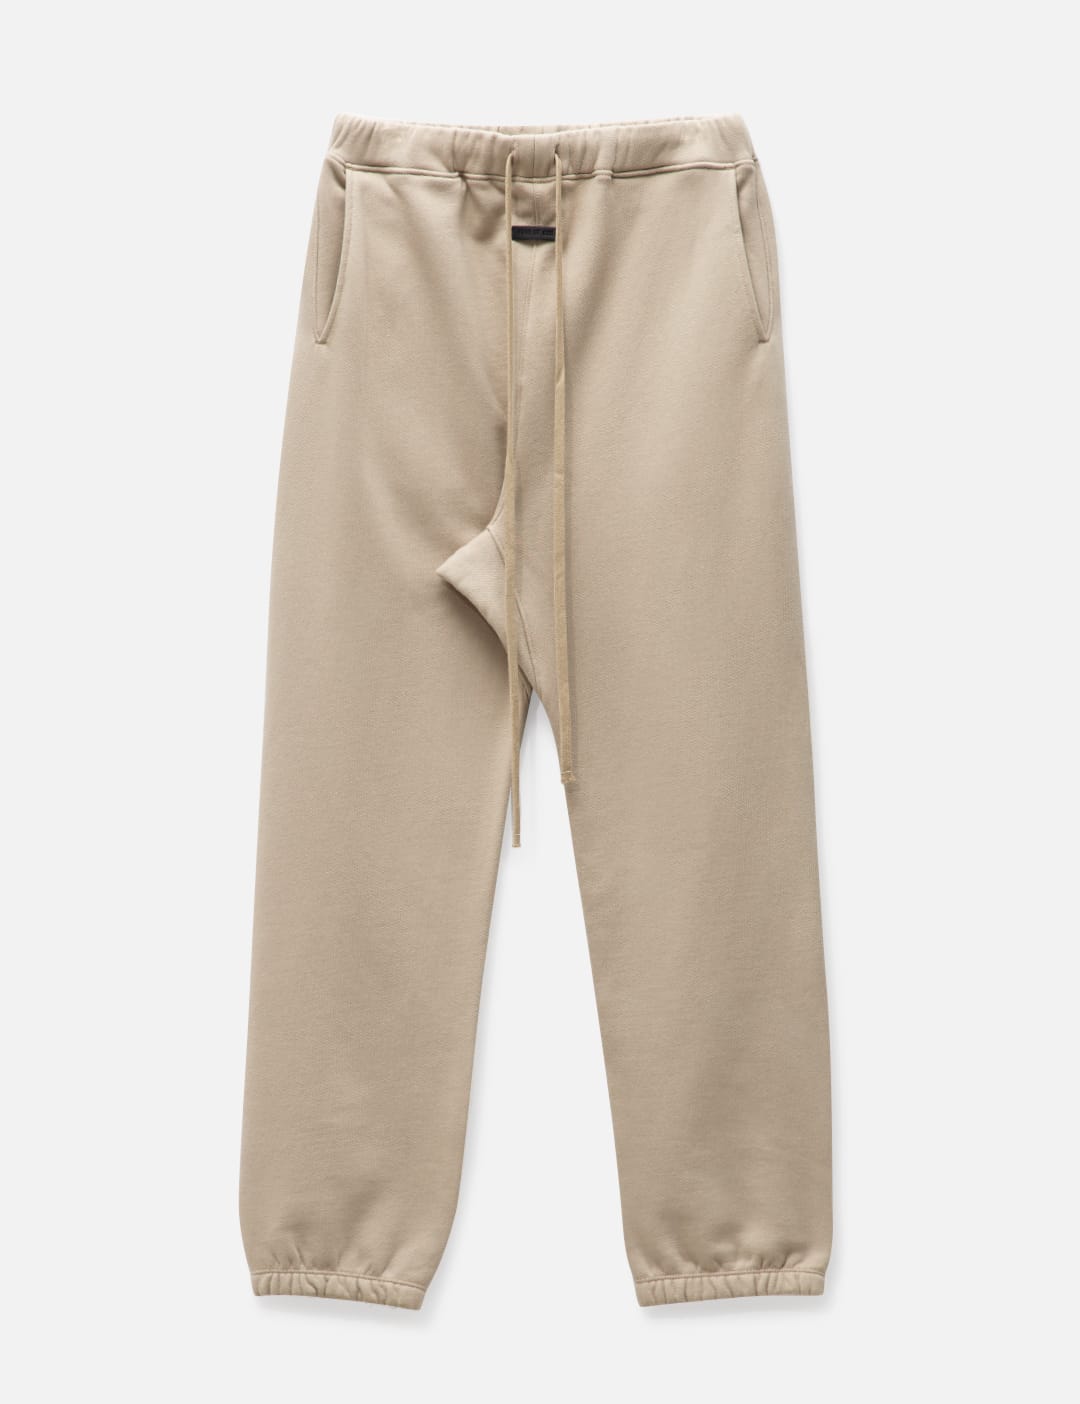 Pants In Sale   HBX   Globally Curated Fashion and Lifestyle by